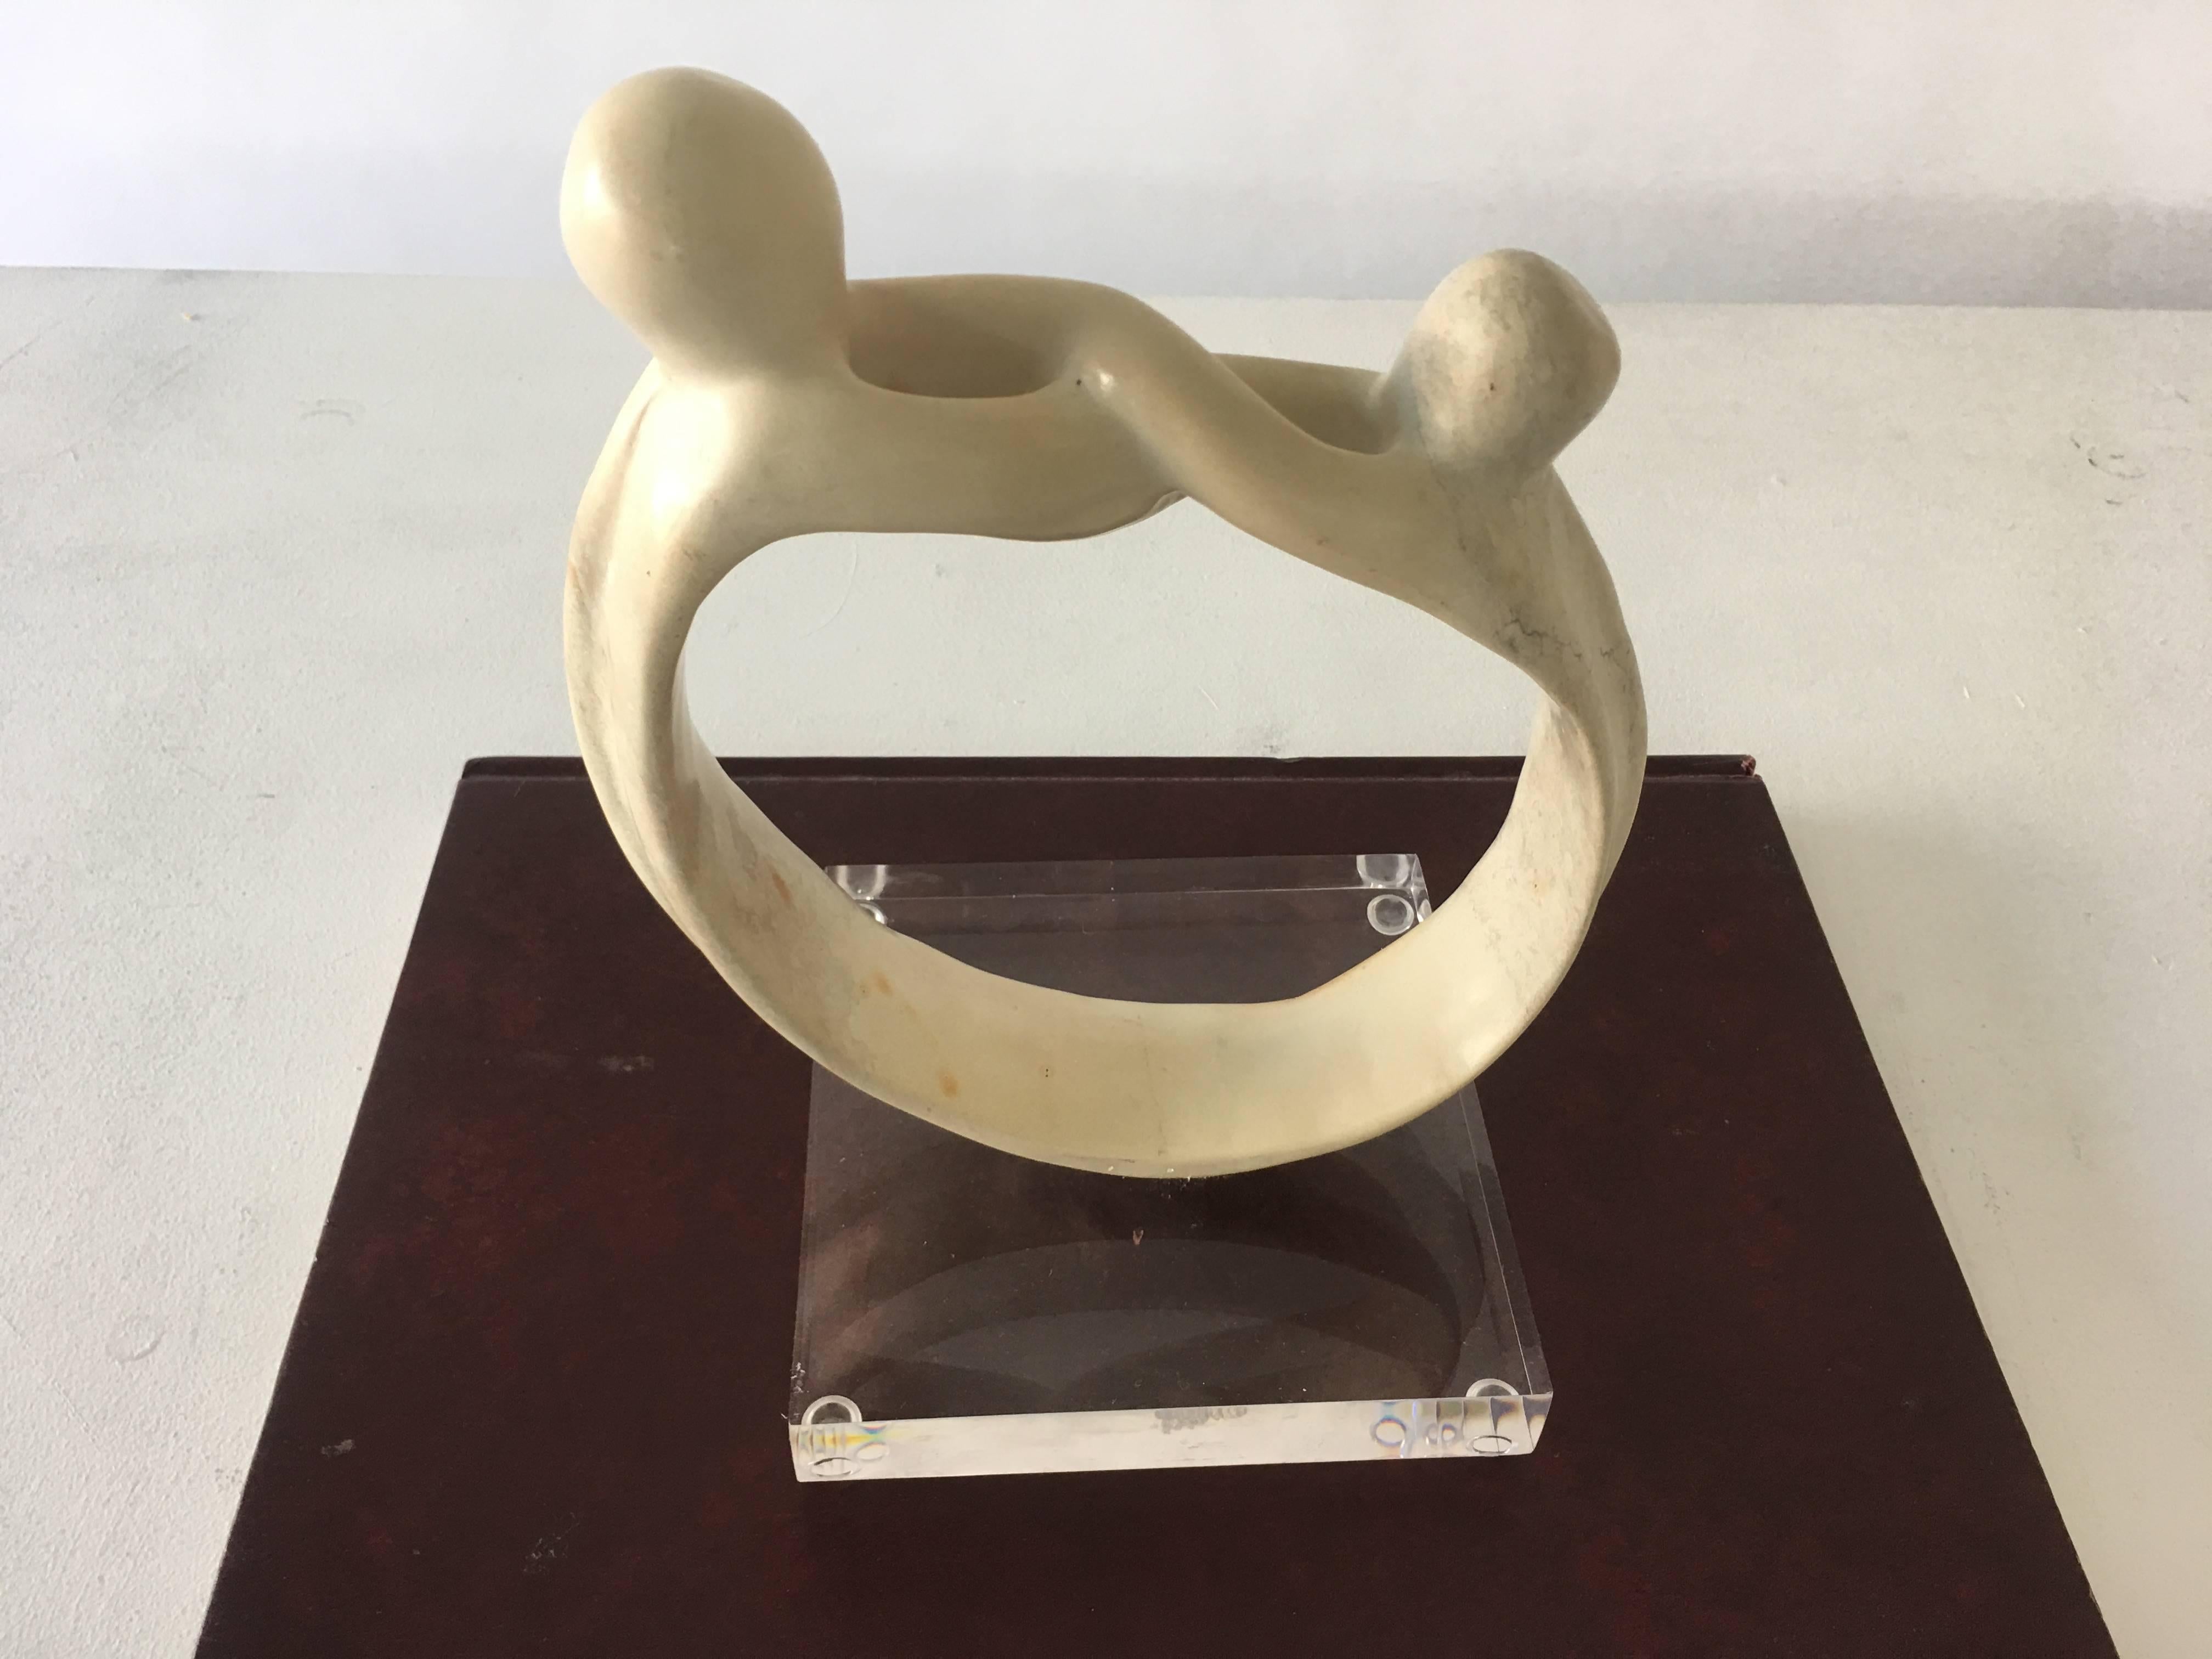 Beautiful abstract marble sculpture with one inch thick Lucite base, 1960s.